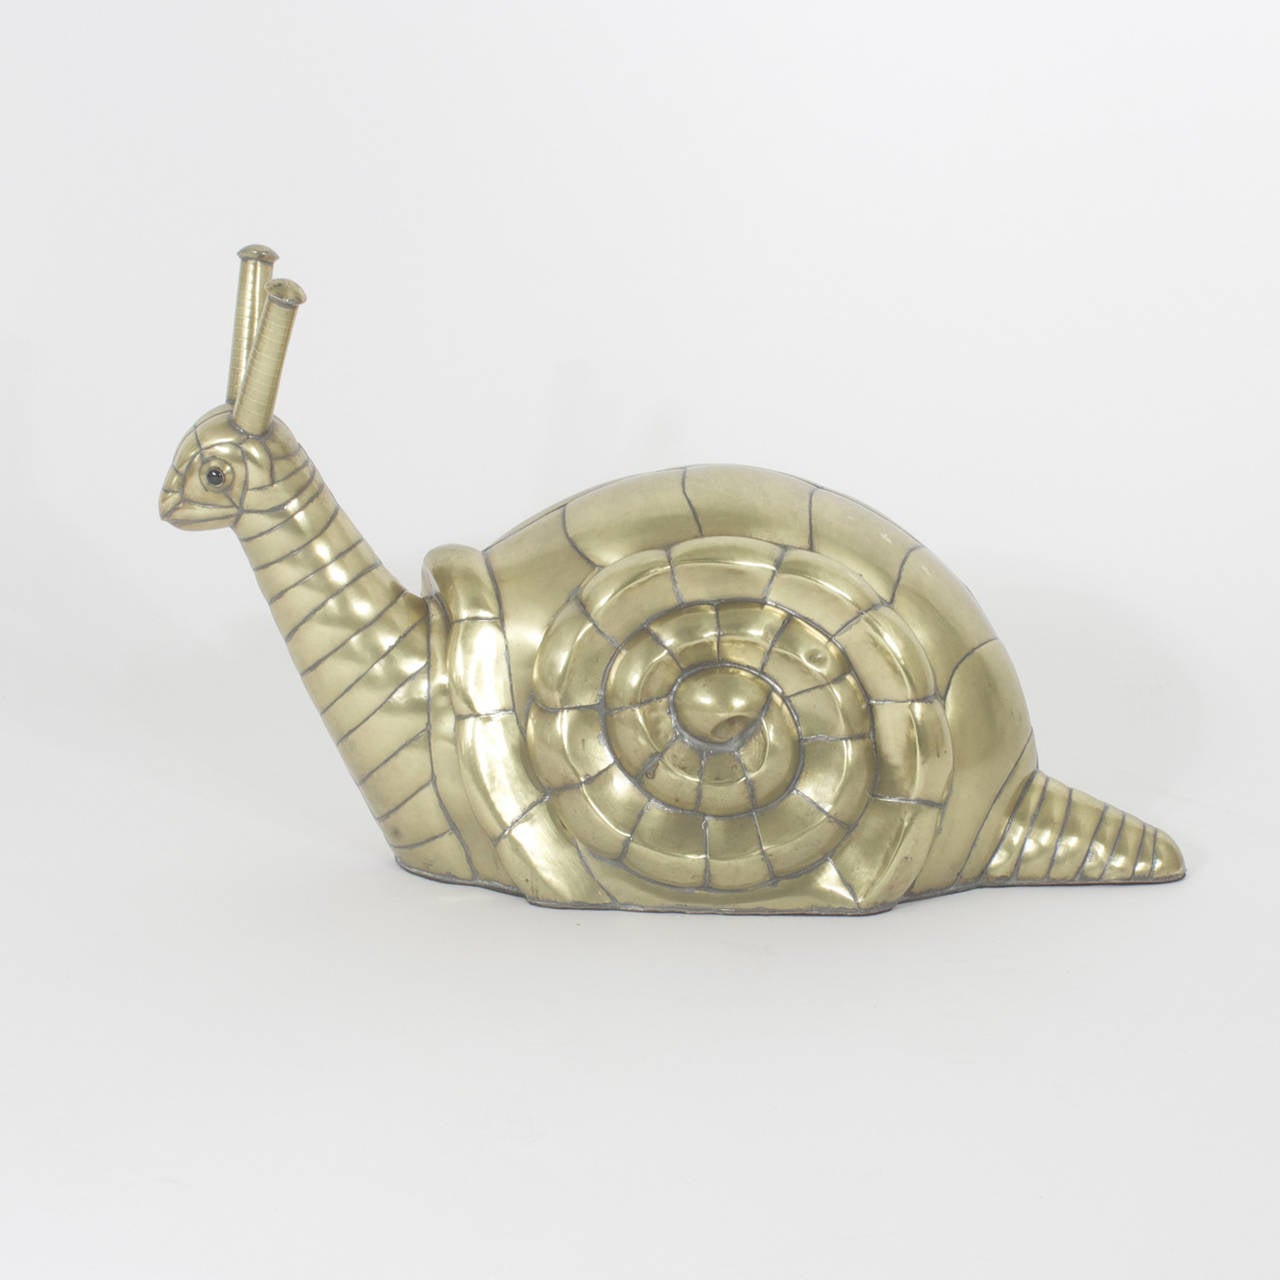 Perky Bustamante brass snail sculpture with glass eyes, formidable antennas and a subtle confidence. The brass has been polished to a warm glow and lacquered for easy care. Newly polished.